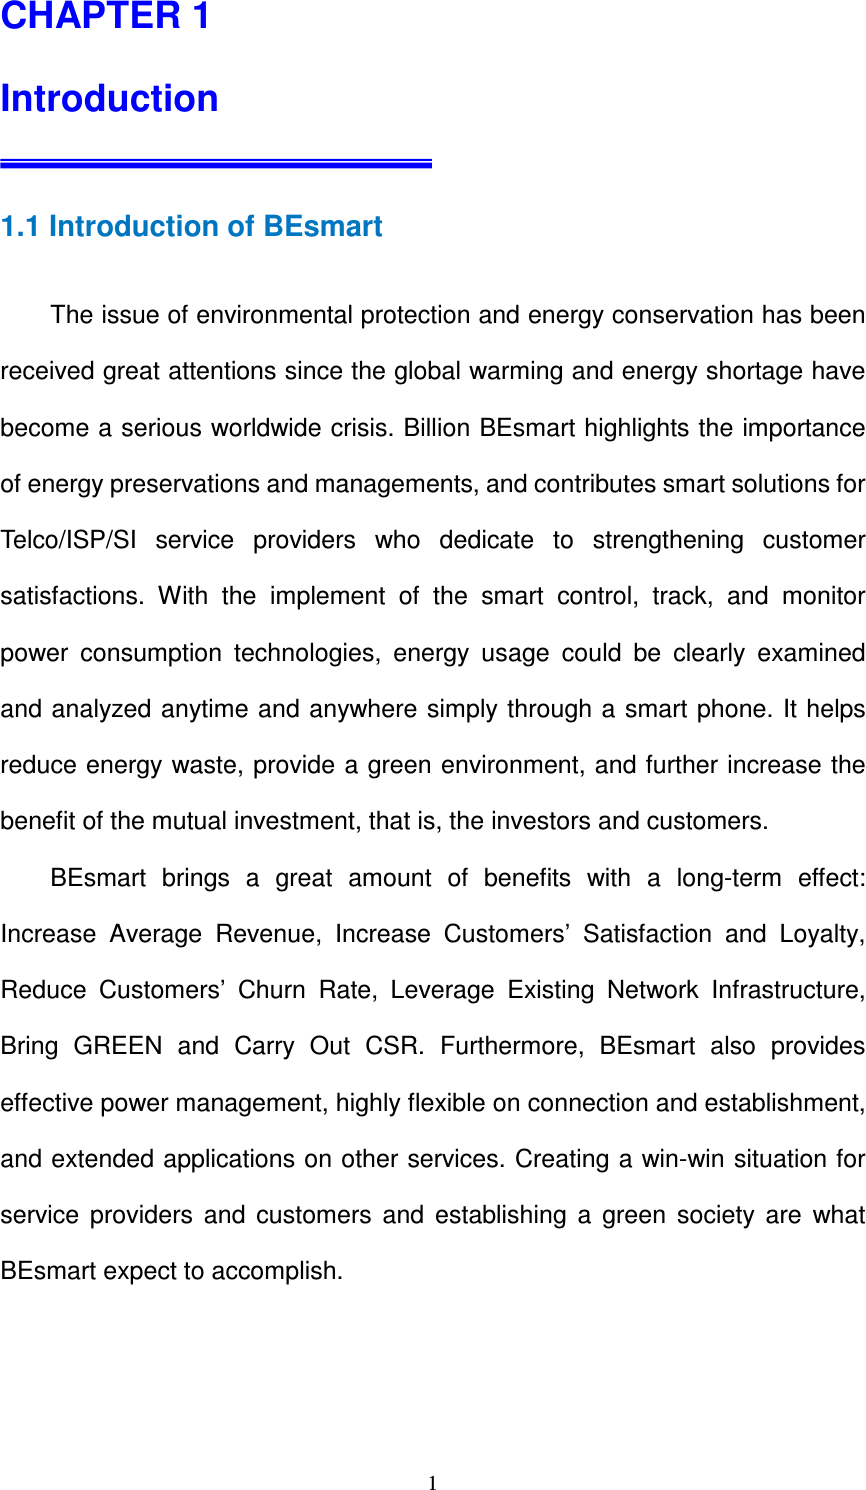   1CHAPTER 1    Introduction   1.1 Introduction of BEsmart          The issue of environmental protection and energy conservation has been received great attentions since the global warming and energy shortage have become a serious worldwide crisis. Billion BEsmart highlights the importance of energy preservations and managements, and contributes smart solutions for Telco/ISP/SI  service  providers  who  dedicate  to  strengthening  customer satisfactions.  With  the  implement  of  the  smart  control,  track,  and  monitor power  consumption  technologies,  energy  usage  could  be  clearly  examined and analyzed anytime and anywhere simply through a smart phone. It helps reduce energy waste, provide a green environment, and further increase the benefit of the mutual investment, that is, the investors and customers.           BEsmart  brings  a  great  amount  of  benefits  with  a  long-term  effect: Increase  Average  Revenue,  Increase  Customers’  Satisfaction  and  Loyalty, Reduce  Customers’  Churn  Rate,  Leverage  Existing  Network  Infrastructure, Bring  GREEN  and  Carry  Out  CSR.  Furthermore,  BEsmart  also  provides effective power management, highly flexible on connection and establishment, and extended applications on other services. Creating a win-win situation for service  providers  and  customers  and  establishing  a  green  society  are  what BEsmart expect to accomplish.        